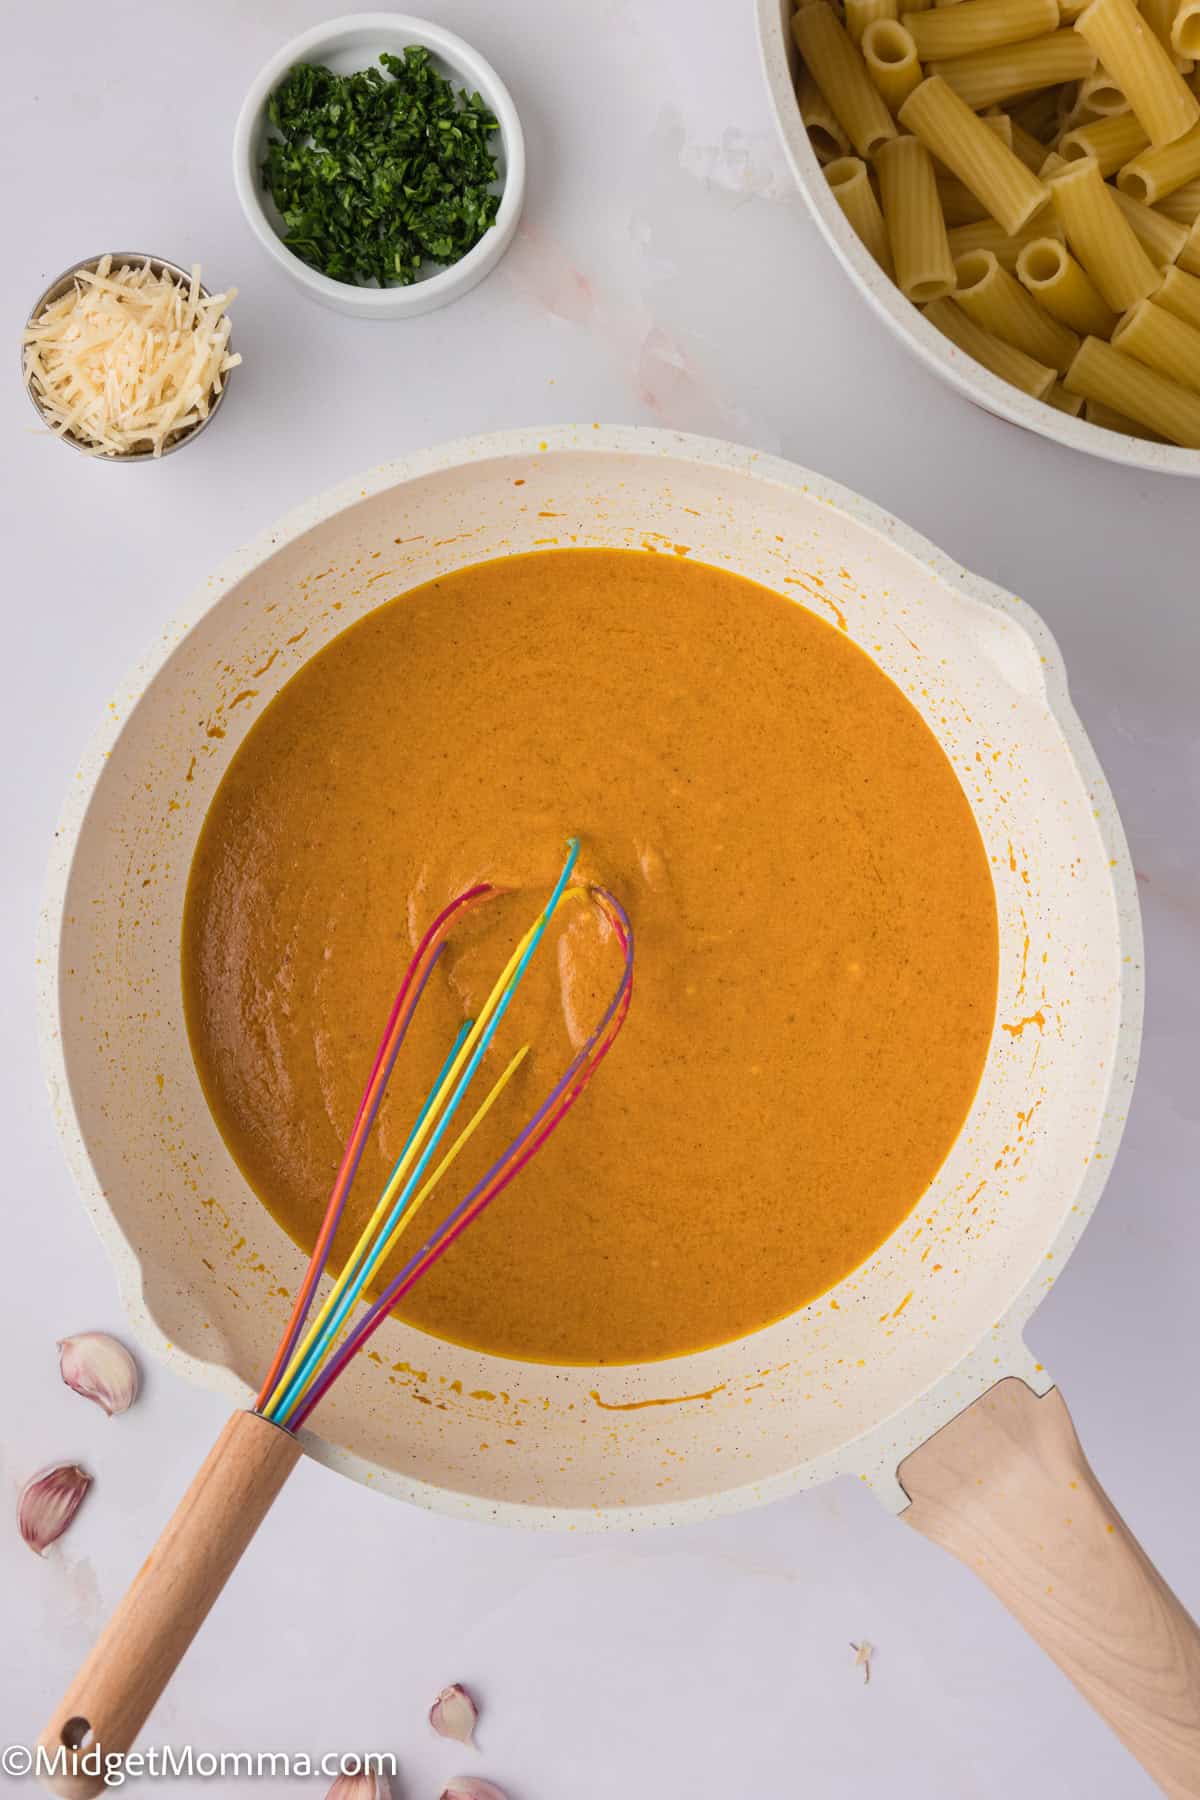 A pot of creamy pumpkin sauce with a colorful whisk, surrounded by ingredients including pasta, garlic, cheese, and chopped herbs on a white surface.